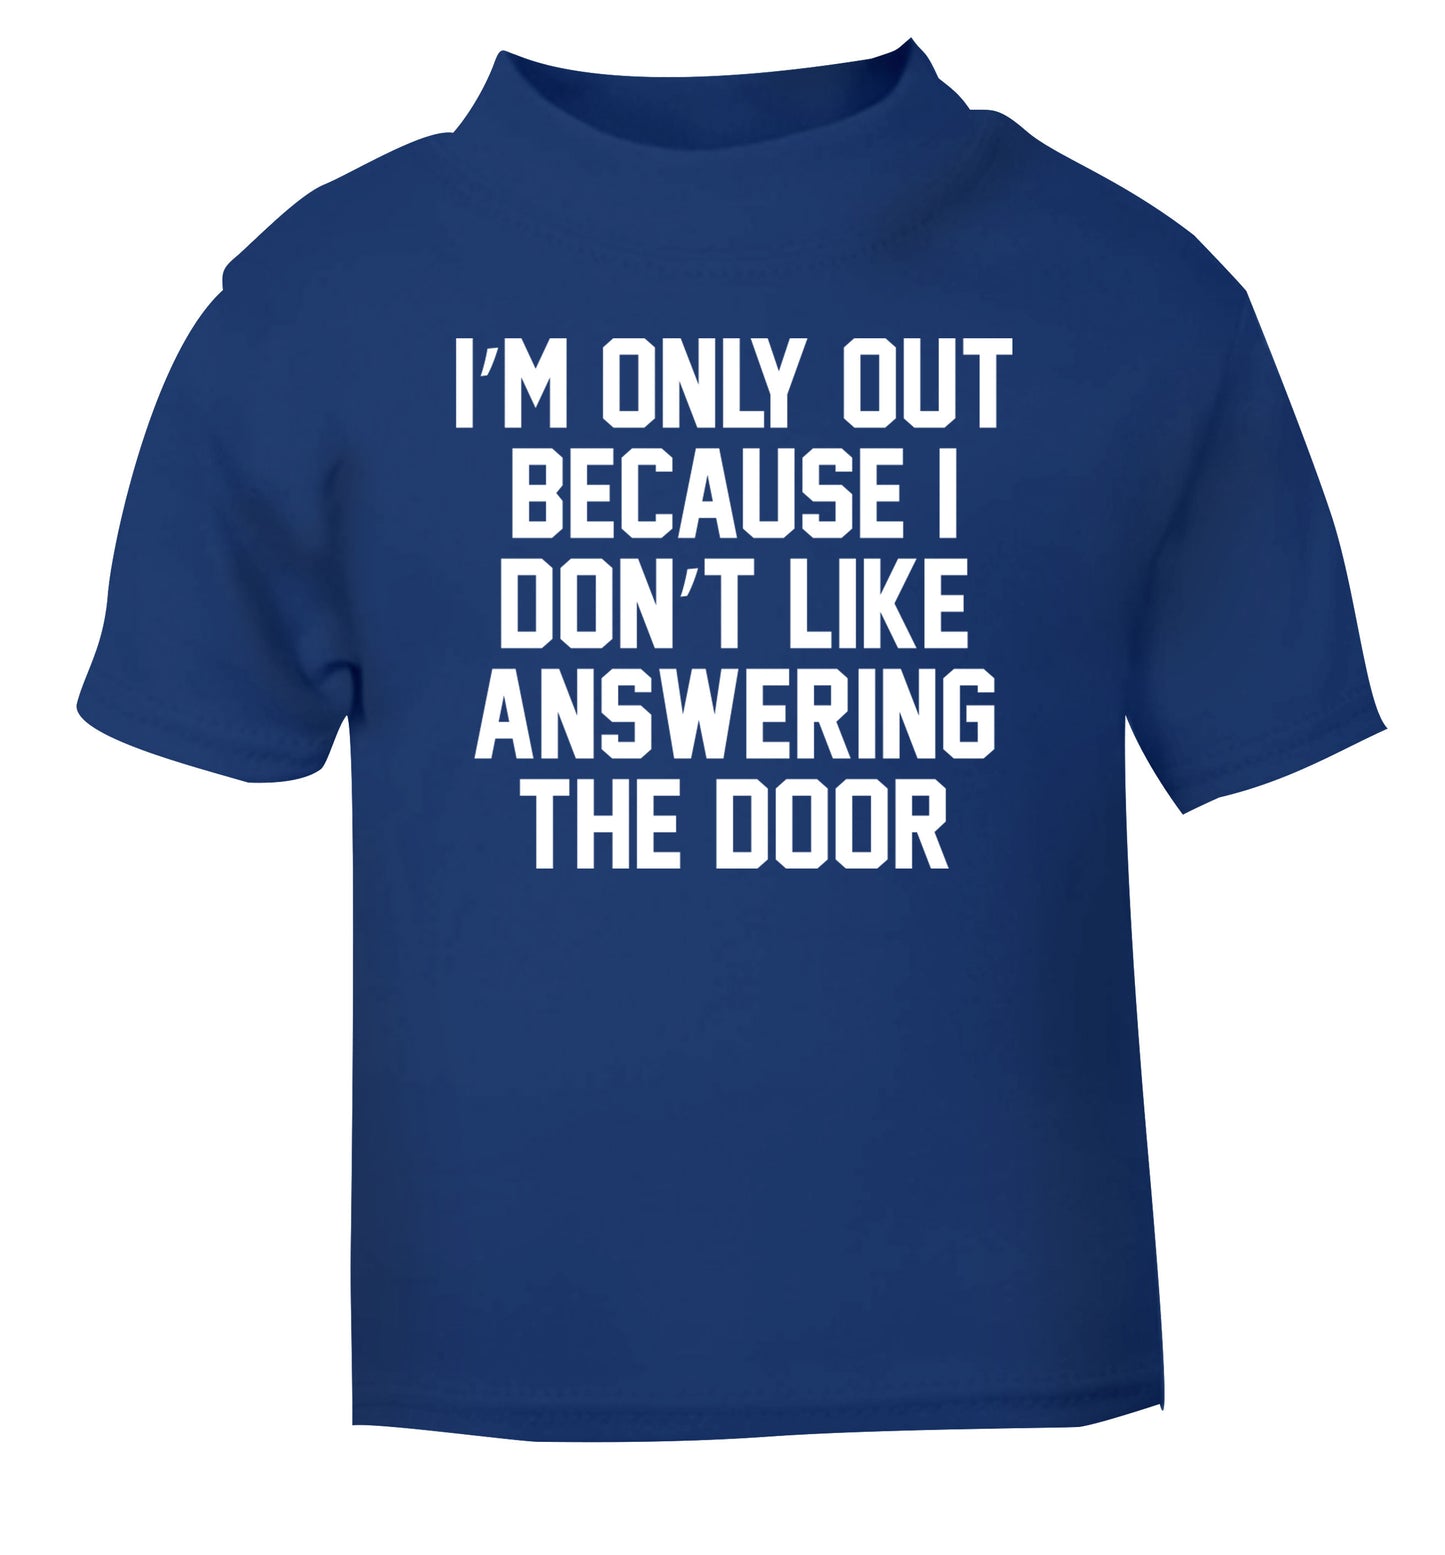 I'm only out because I don't like answering the door blue Baby Toddler Tshirt 2 Years